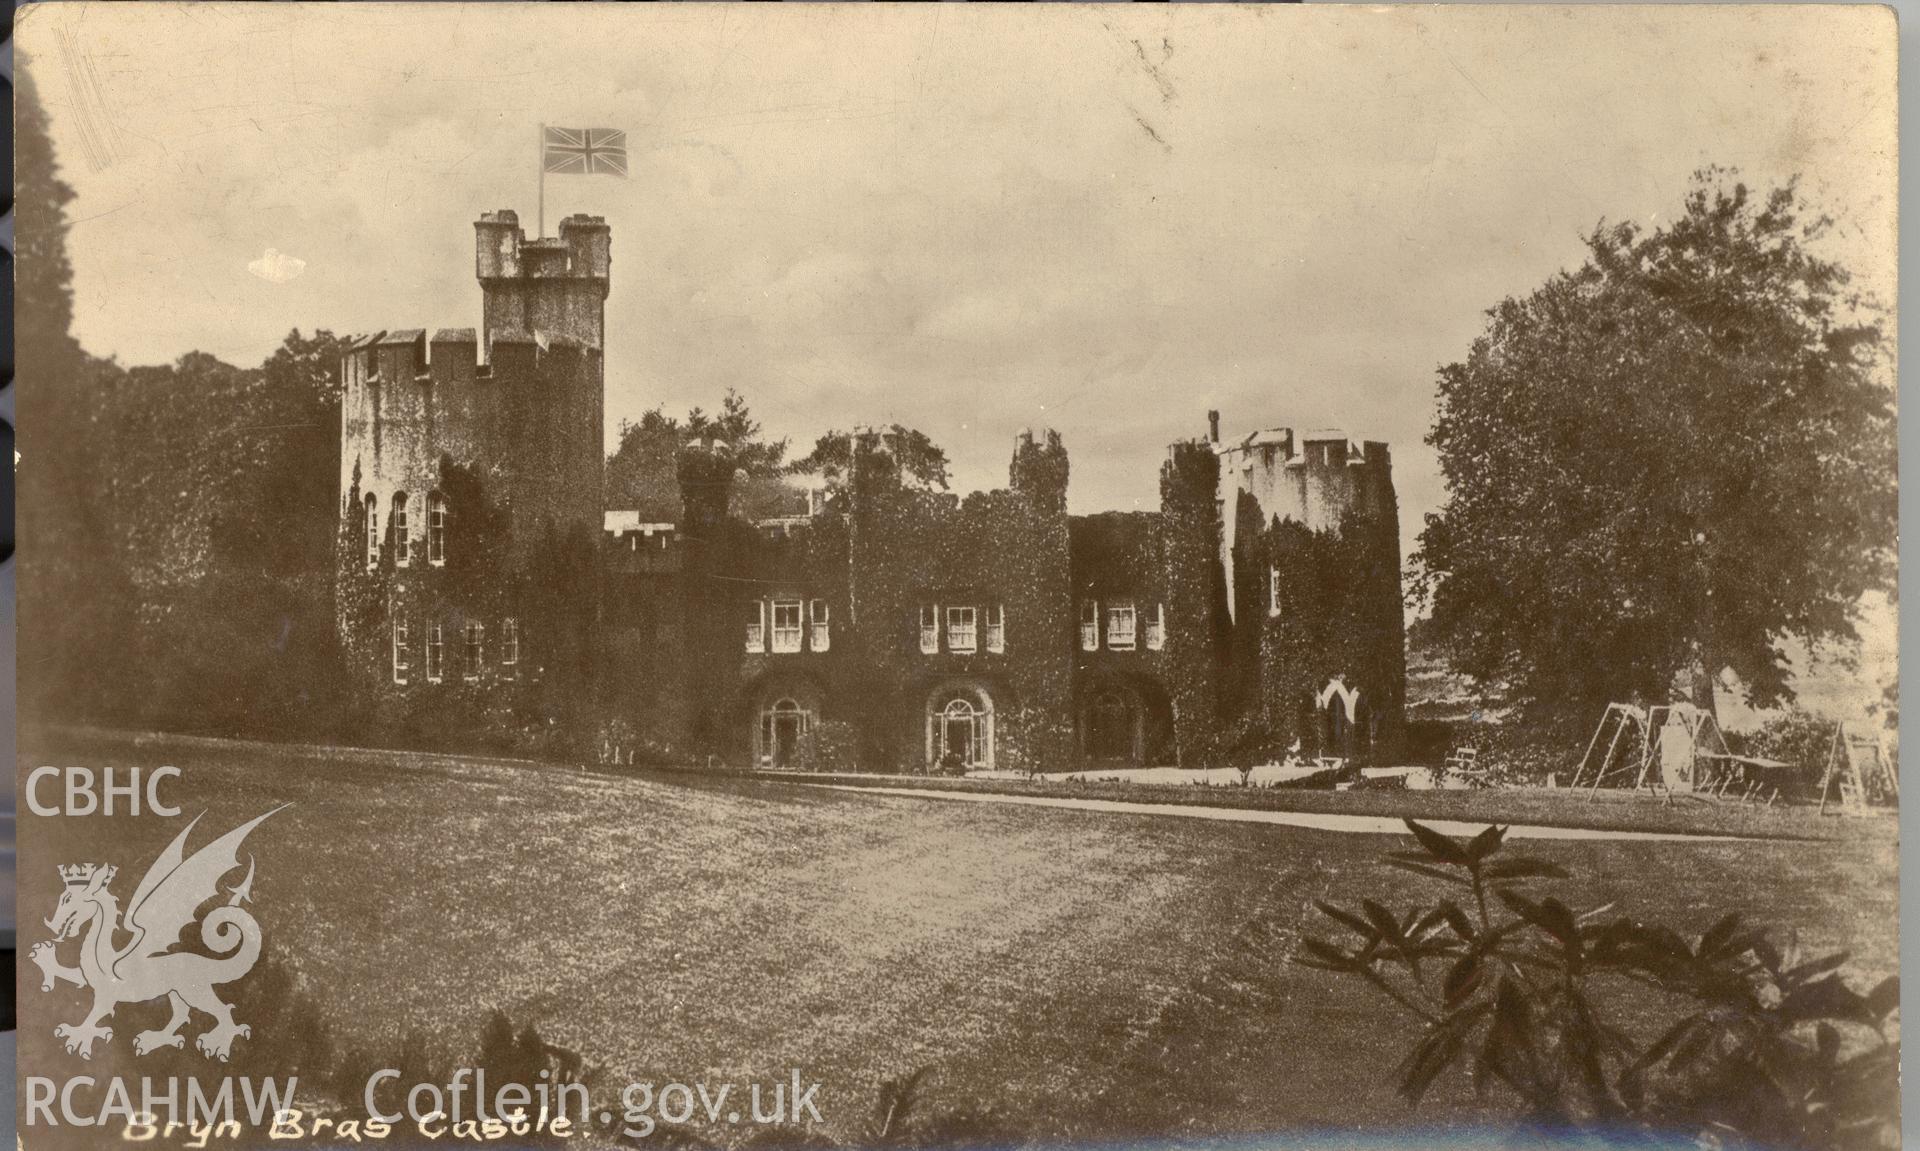 Digitised postcard image of Bryn Bras Castle, Llanrug. Produced by Parks and Gardens Data Services, from an original item in the Peter Davis Collection at Parks and Gardens UK. We hold only web-resolution images of this collection, suitable for viewing on screen and for research purposes only. We do not hold the original images, or publication quality scans.